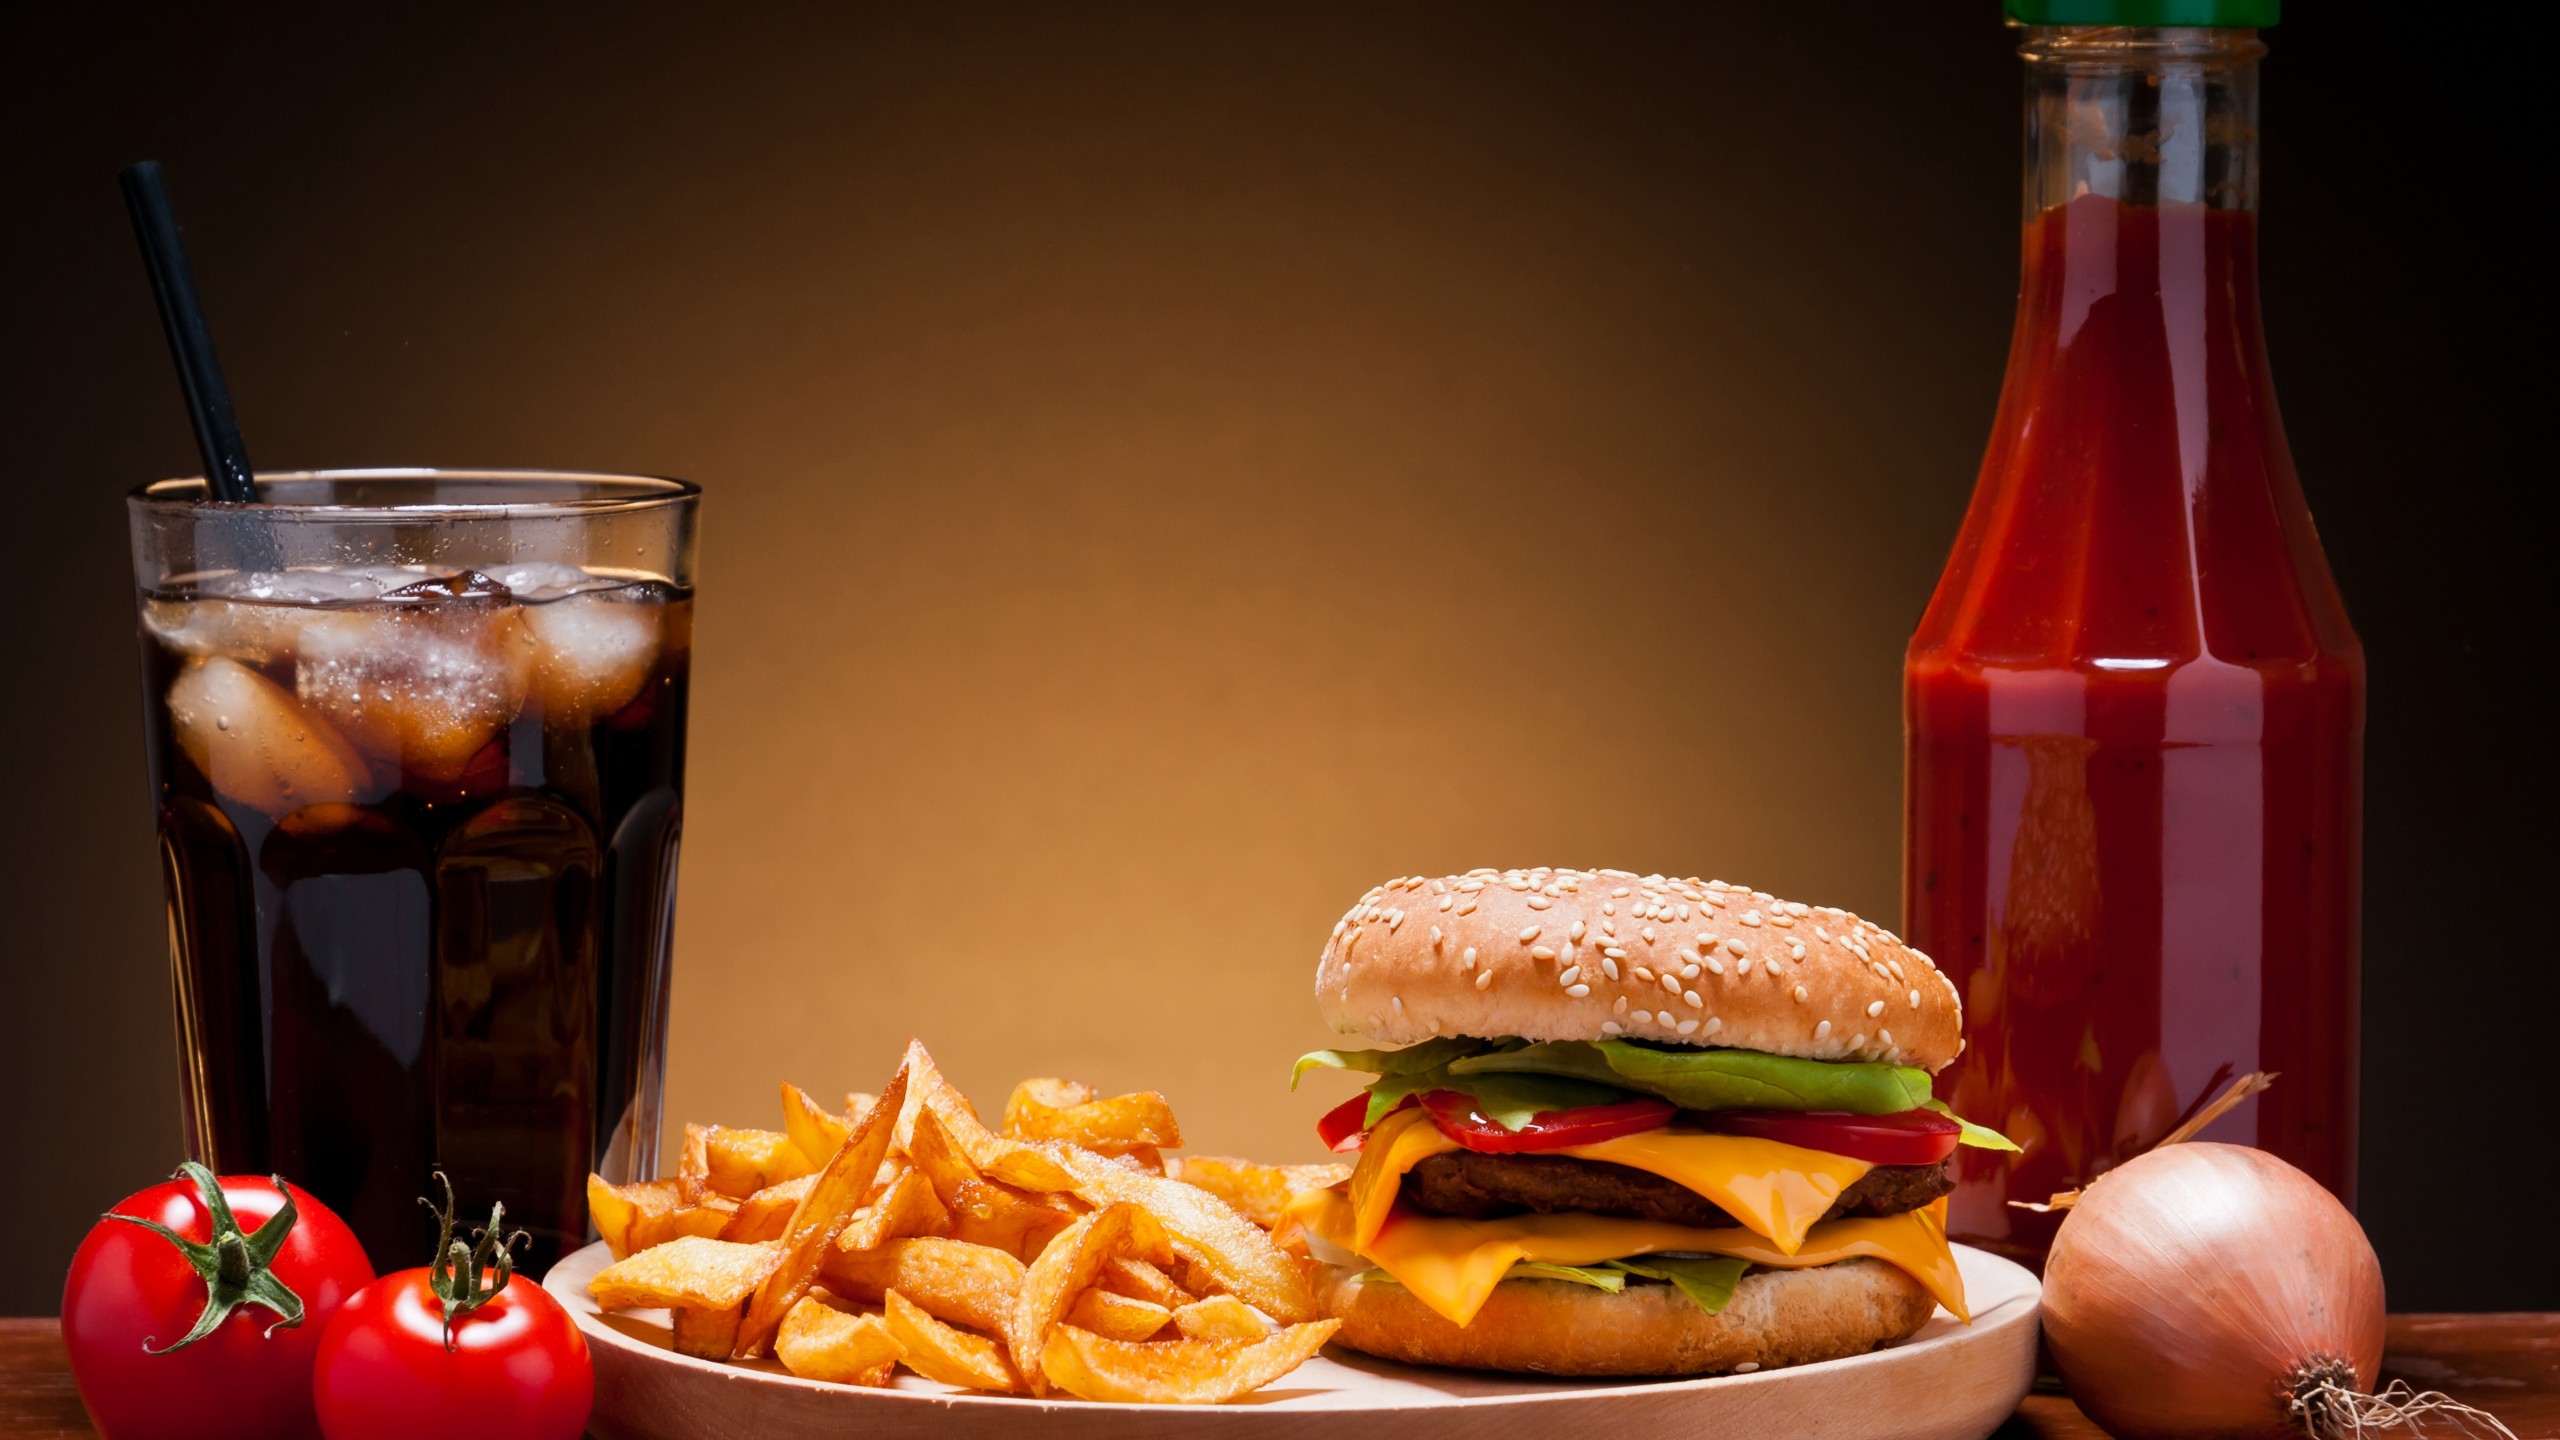 Wallpaper cheeseburger, fast food, french fries, cheese, steak, coca